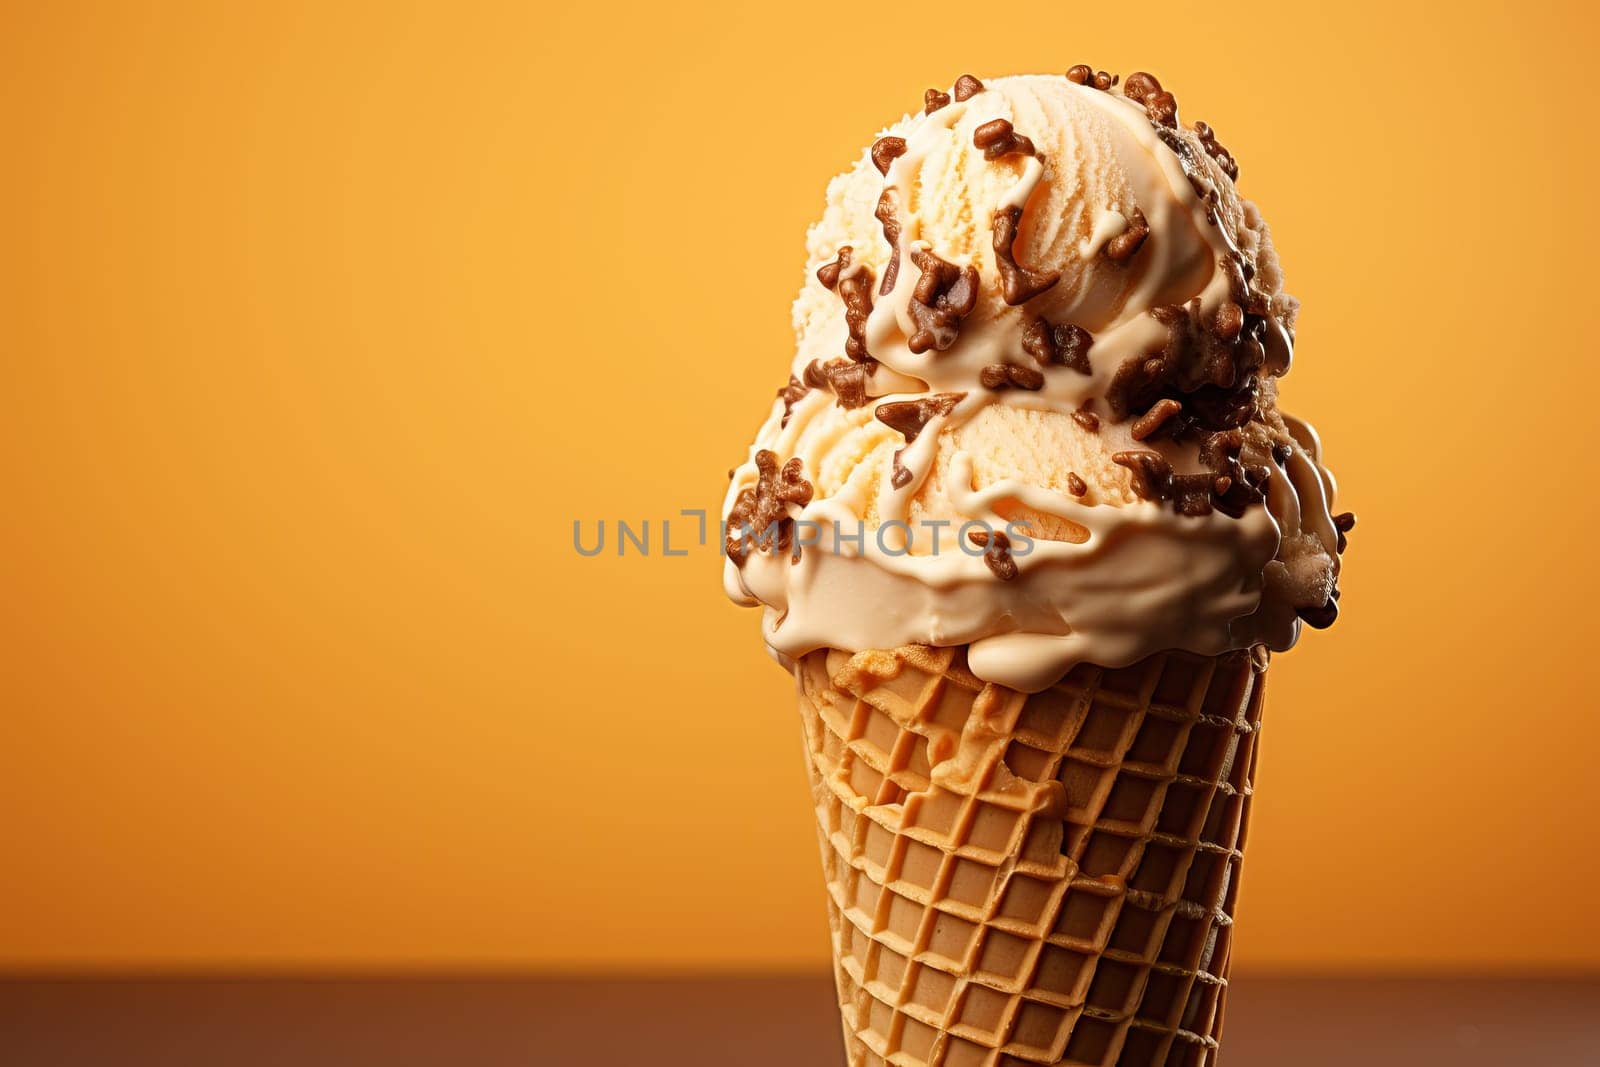 A cone of chocolate ice cream on a yellow background. by Niko_Cingaryuk